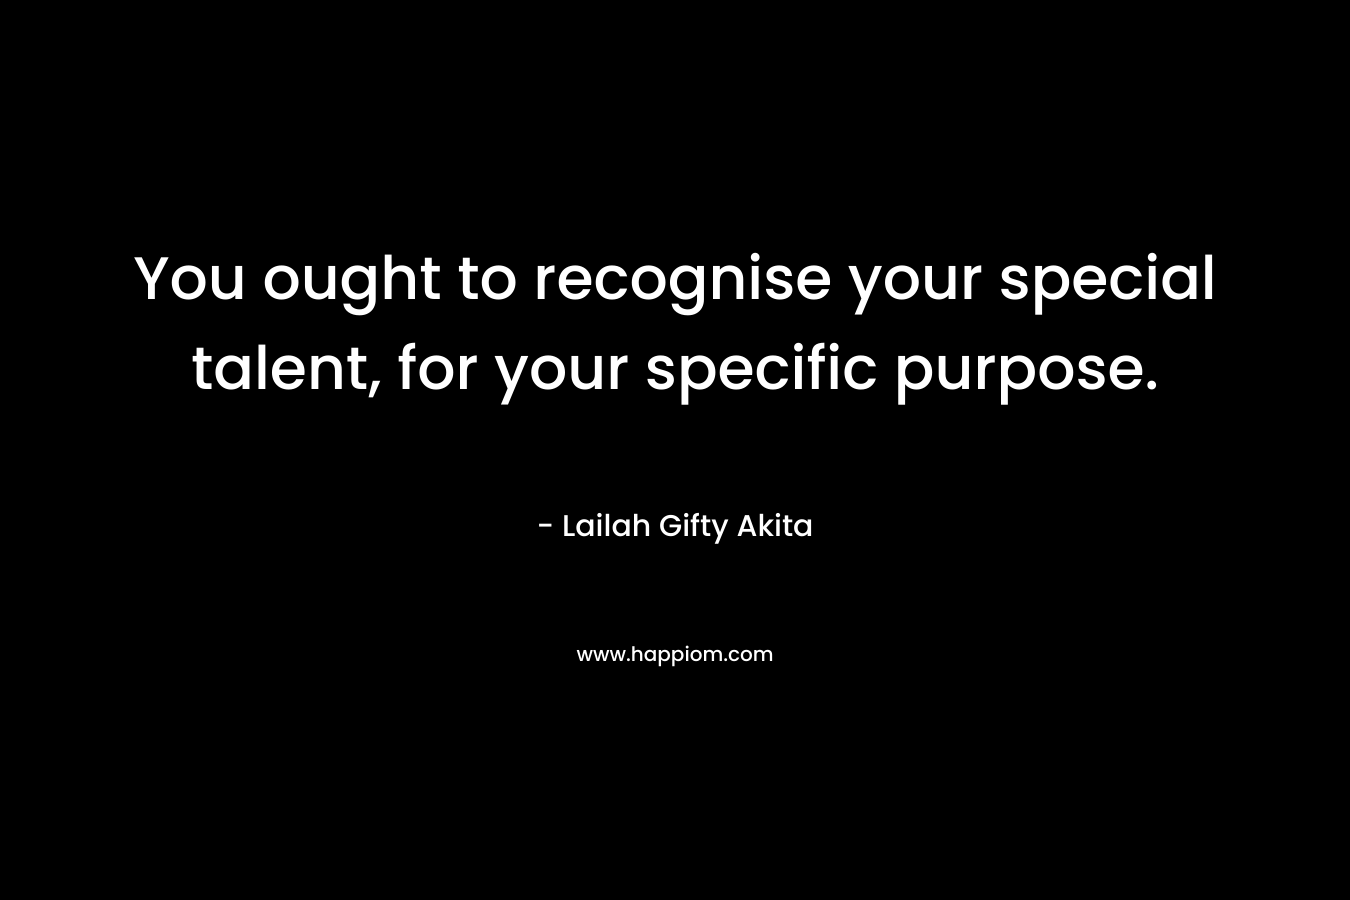 You ought to recognise your special talent, for your specific purpose.